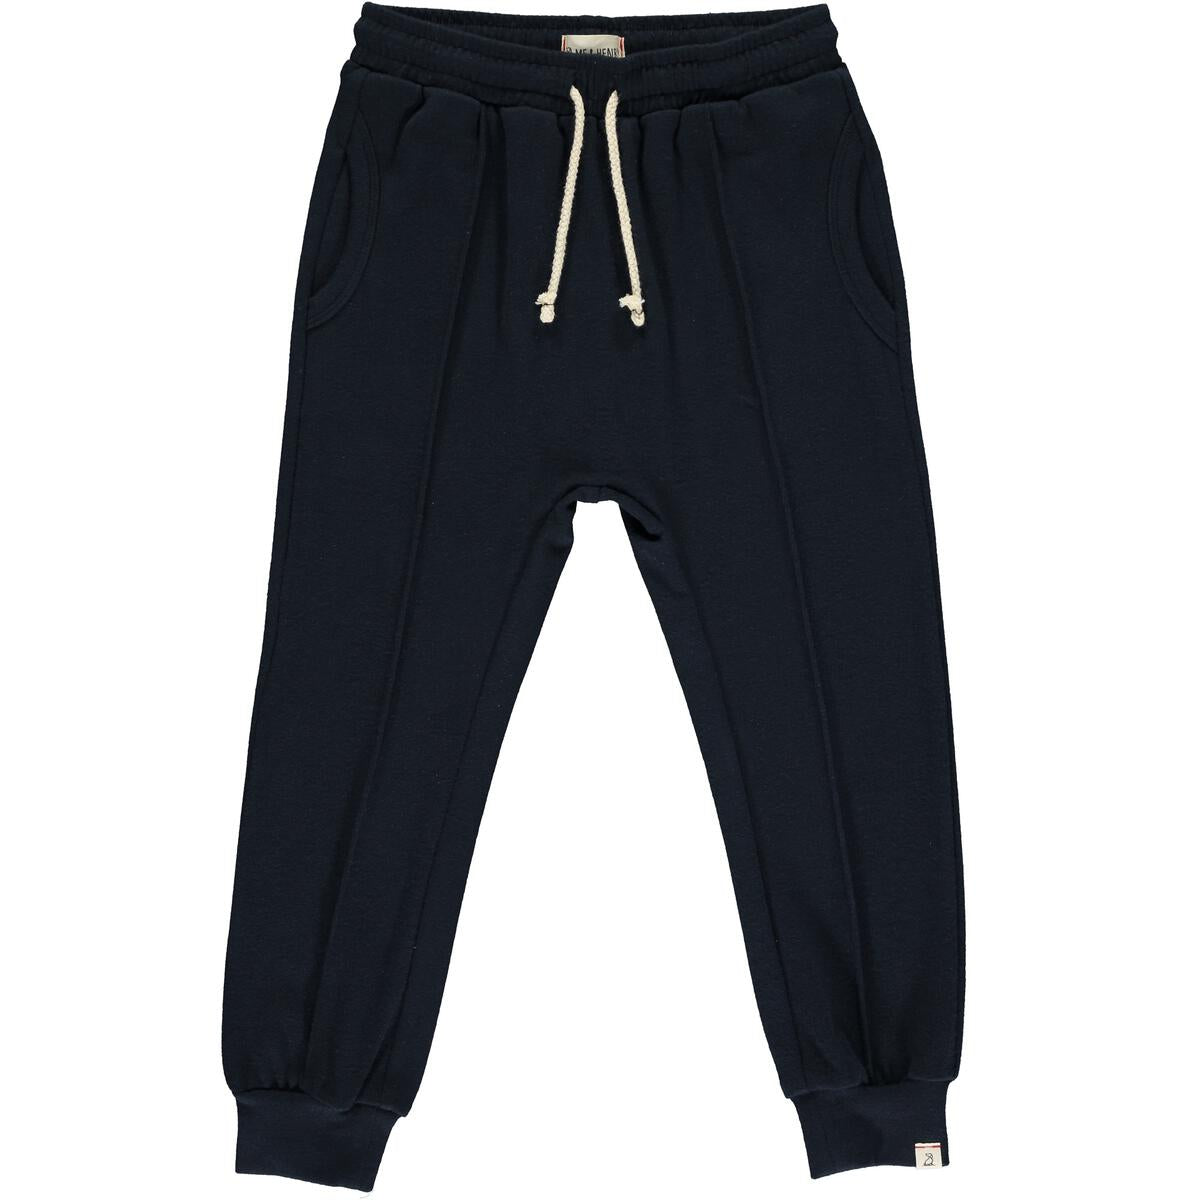 Me and Henry - Oscar Jogger Pants in Navy